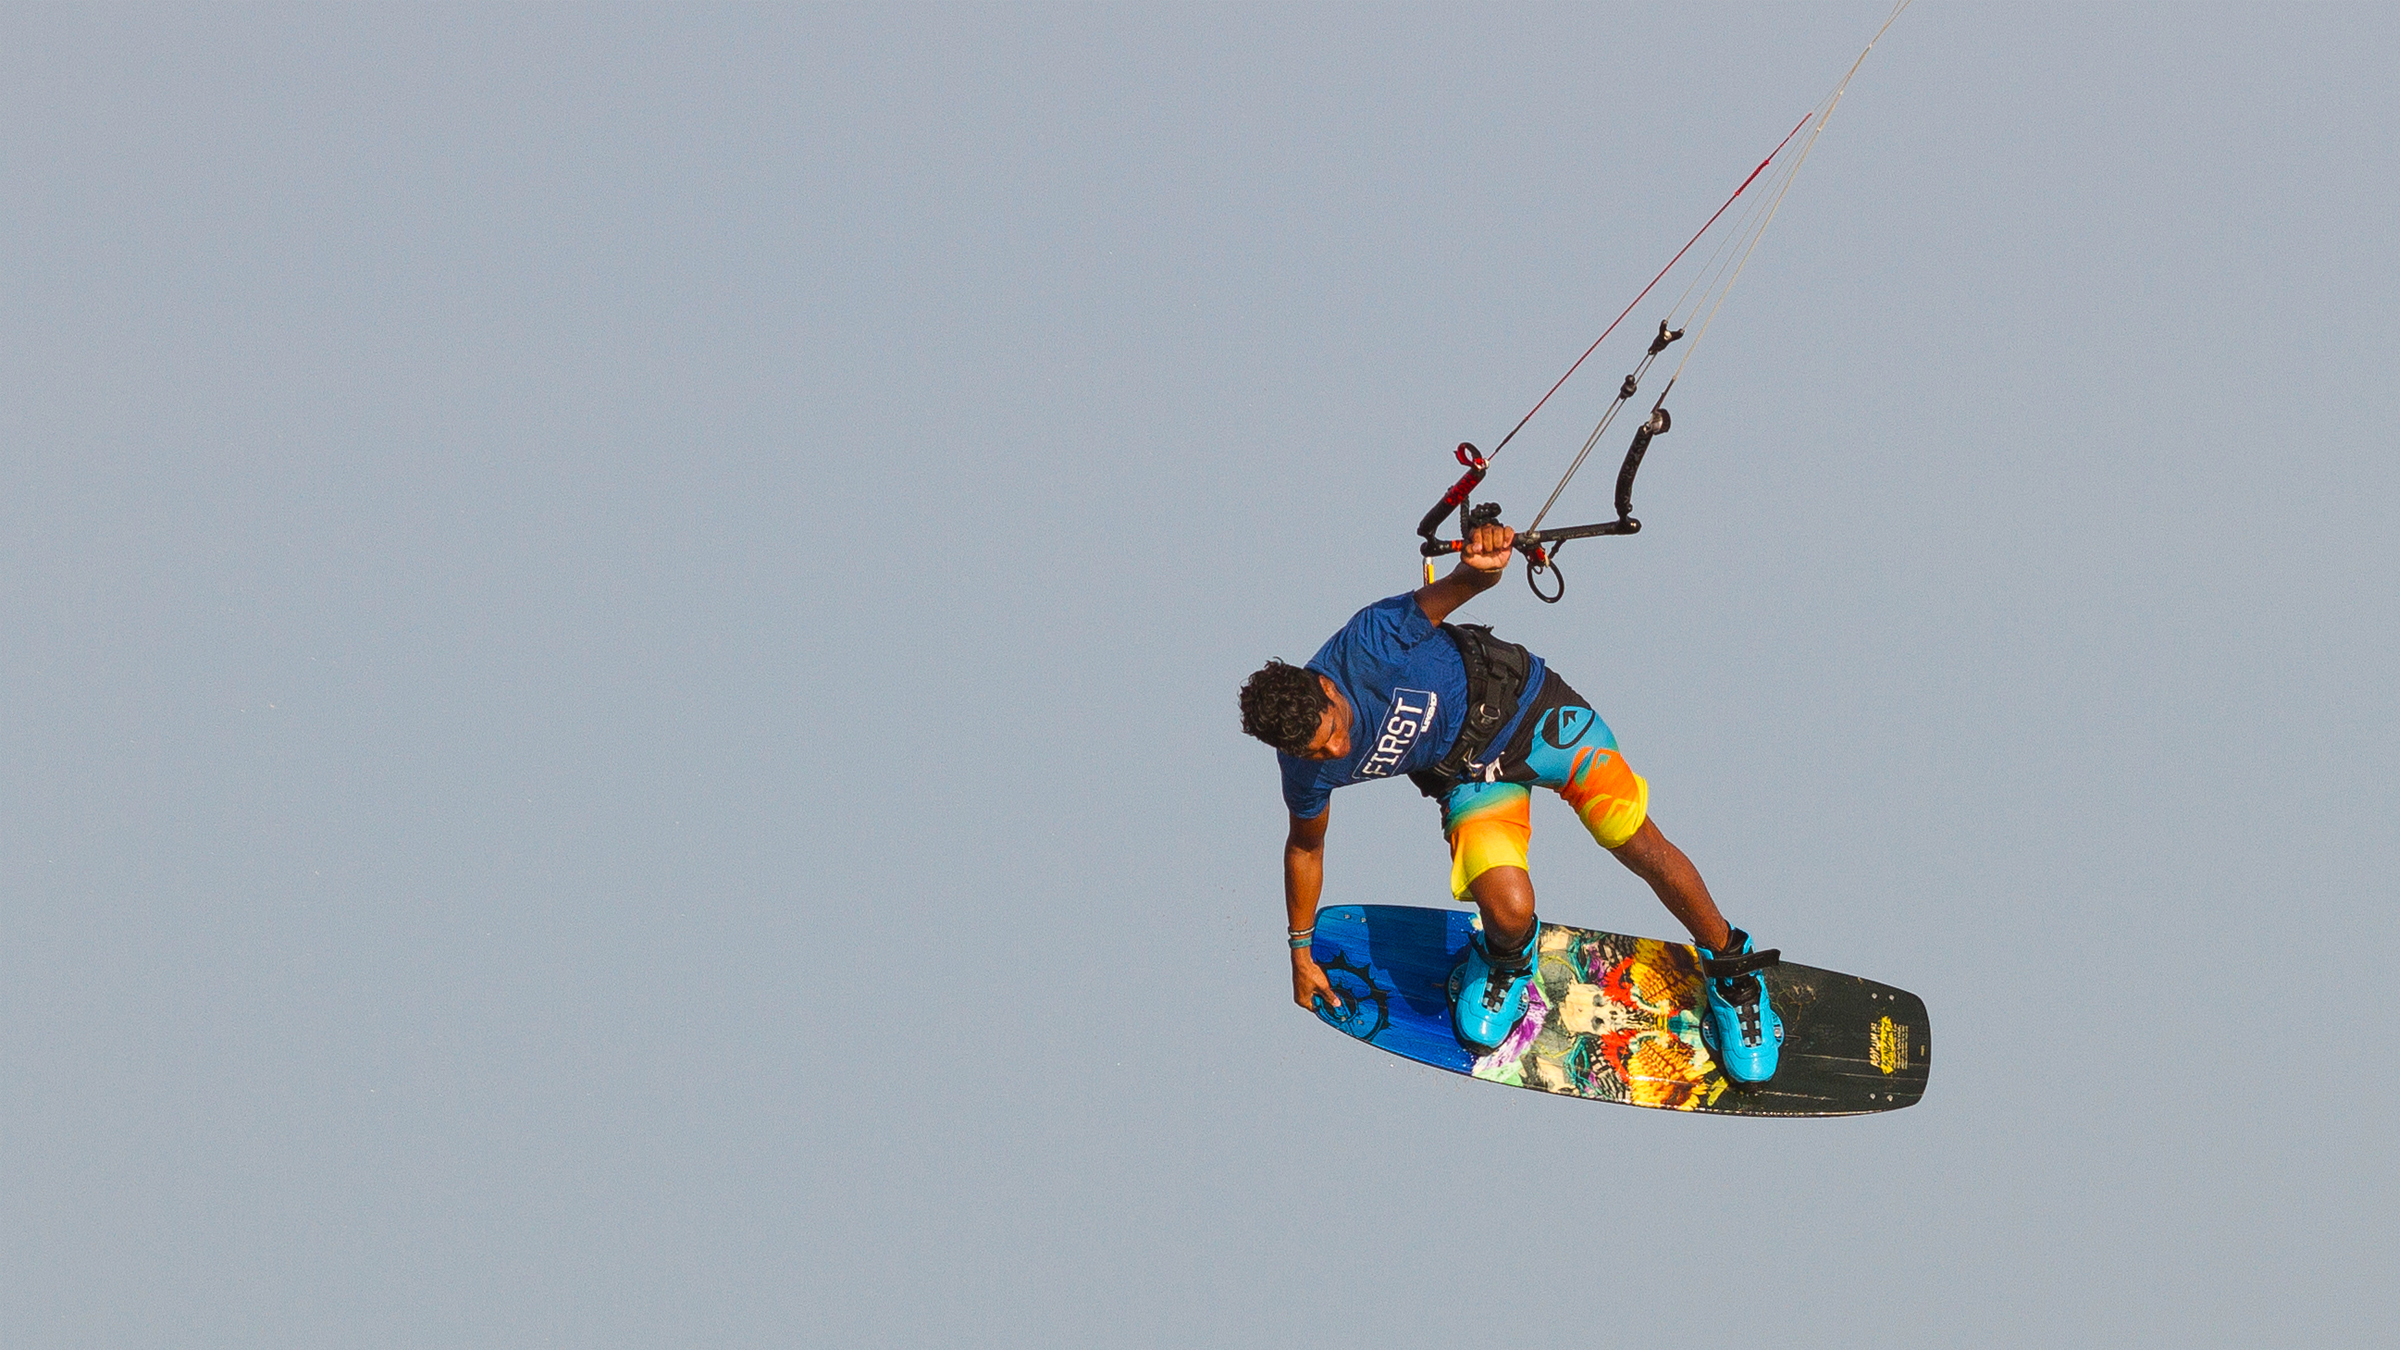 kitesurf wallpaper image - Victor Hays with a tail grab over a Brazilian buggy - Slingshot kiteboarding - in resolution: High Definition - HD 16:9 2400 X 1350